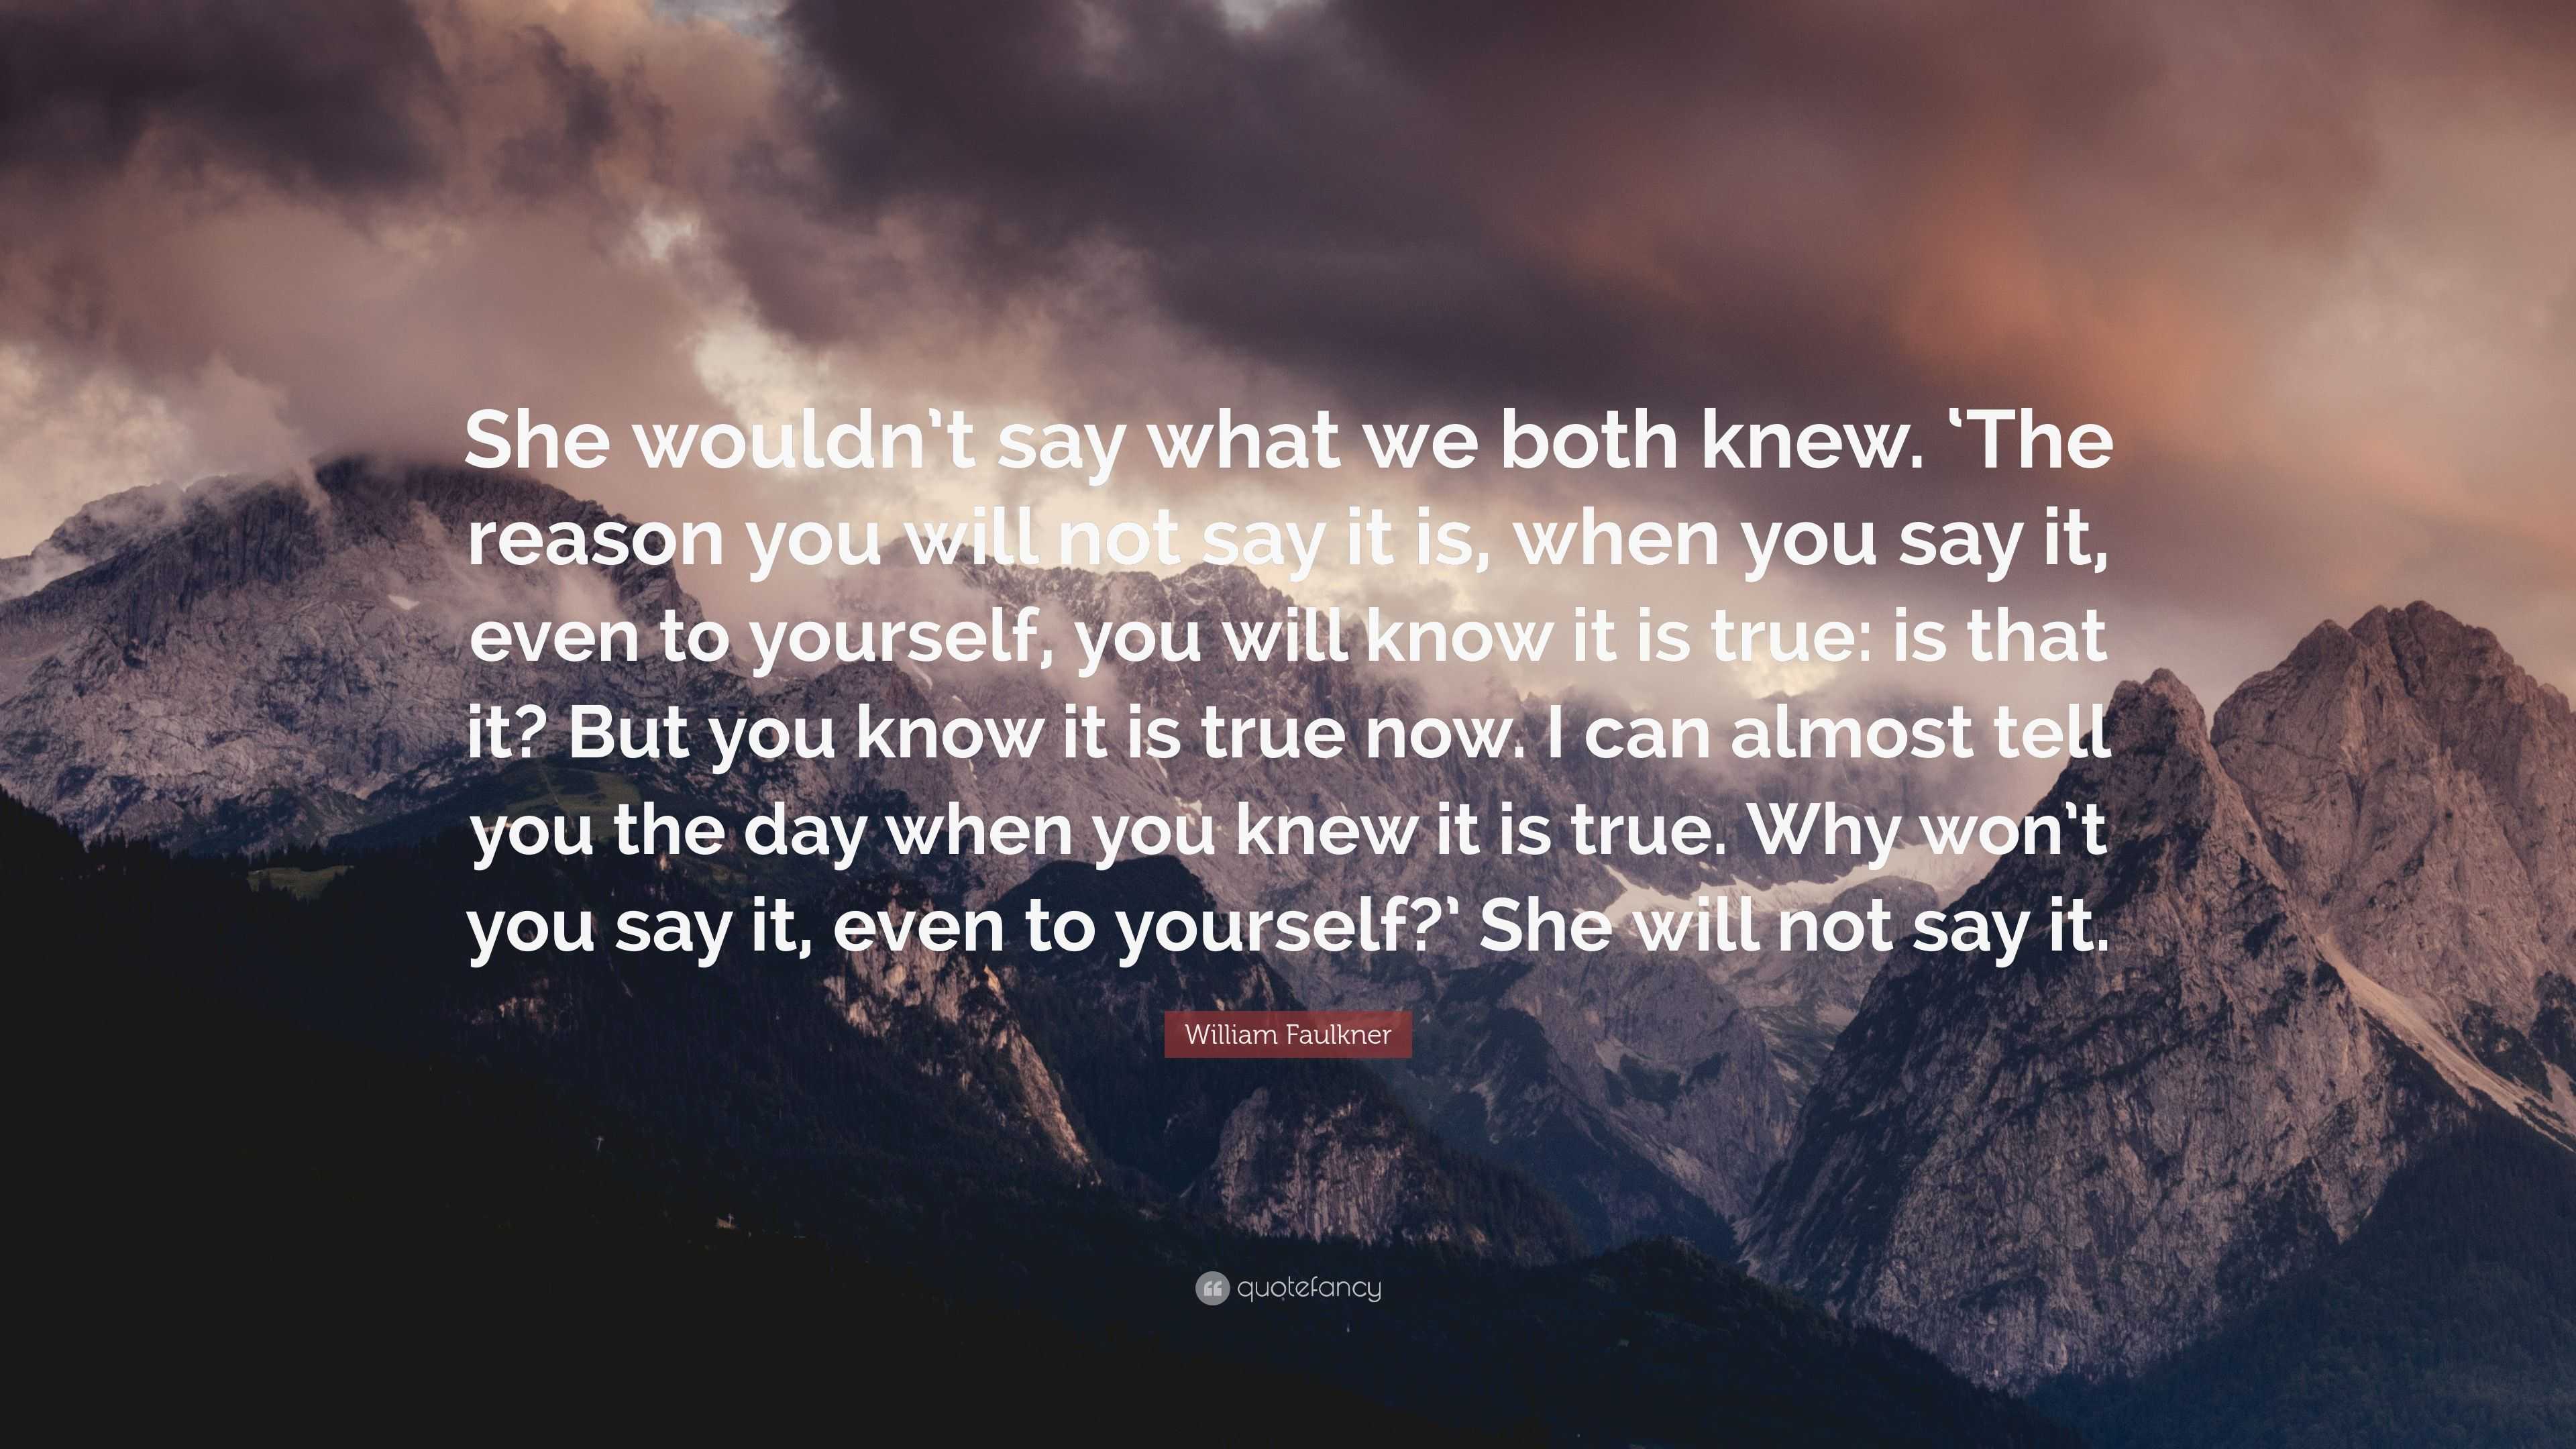 William Faulkner Quote: “She wouldn’t say what we both knew. ‘The ...